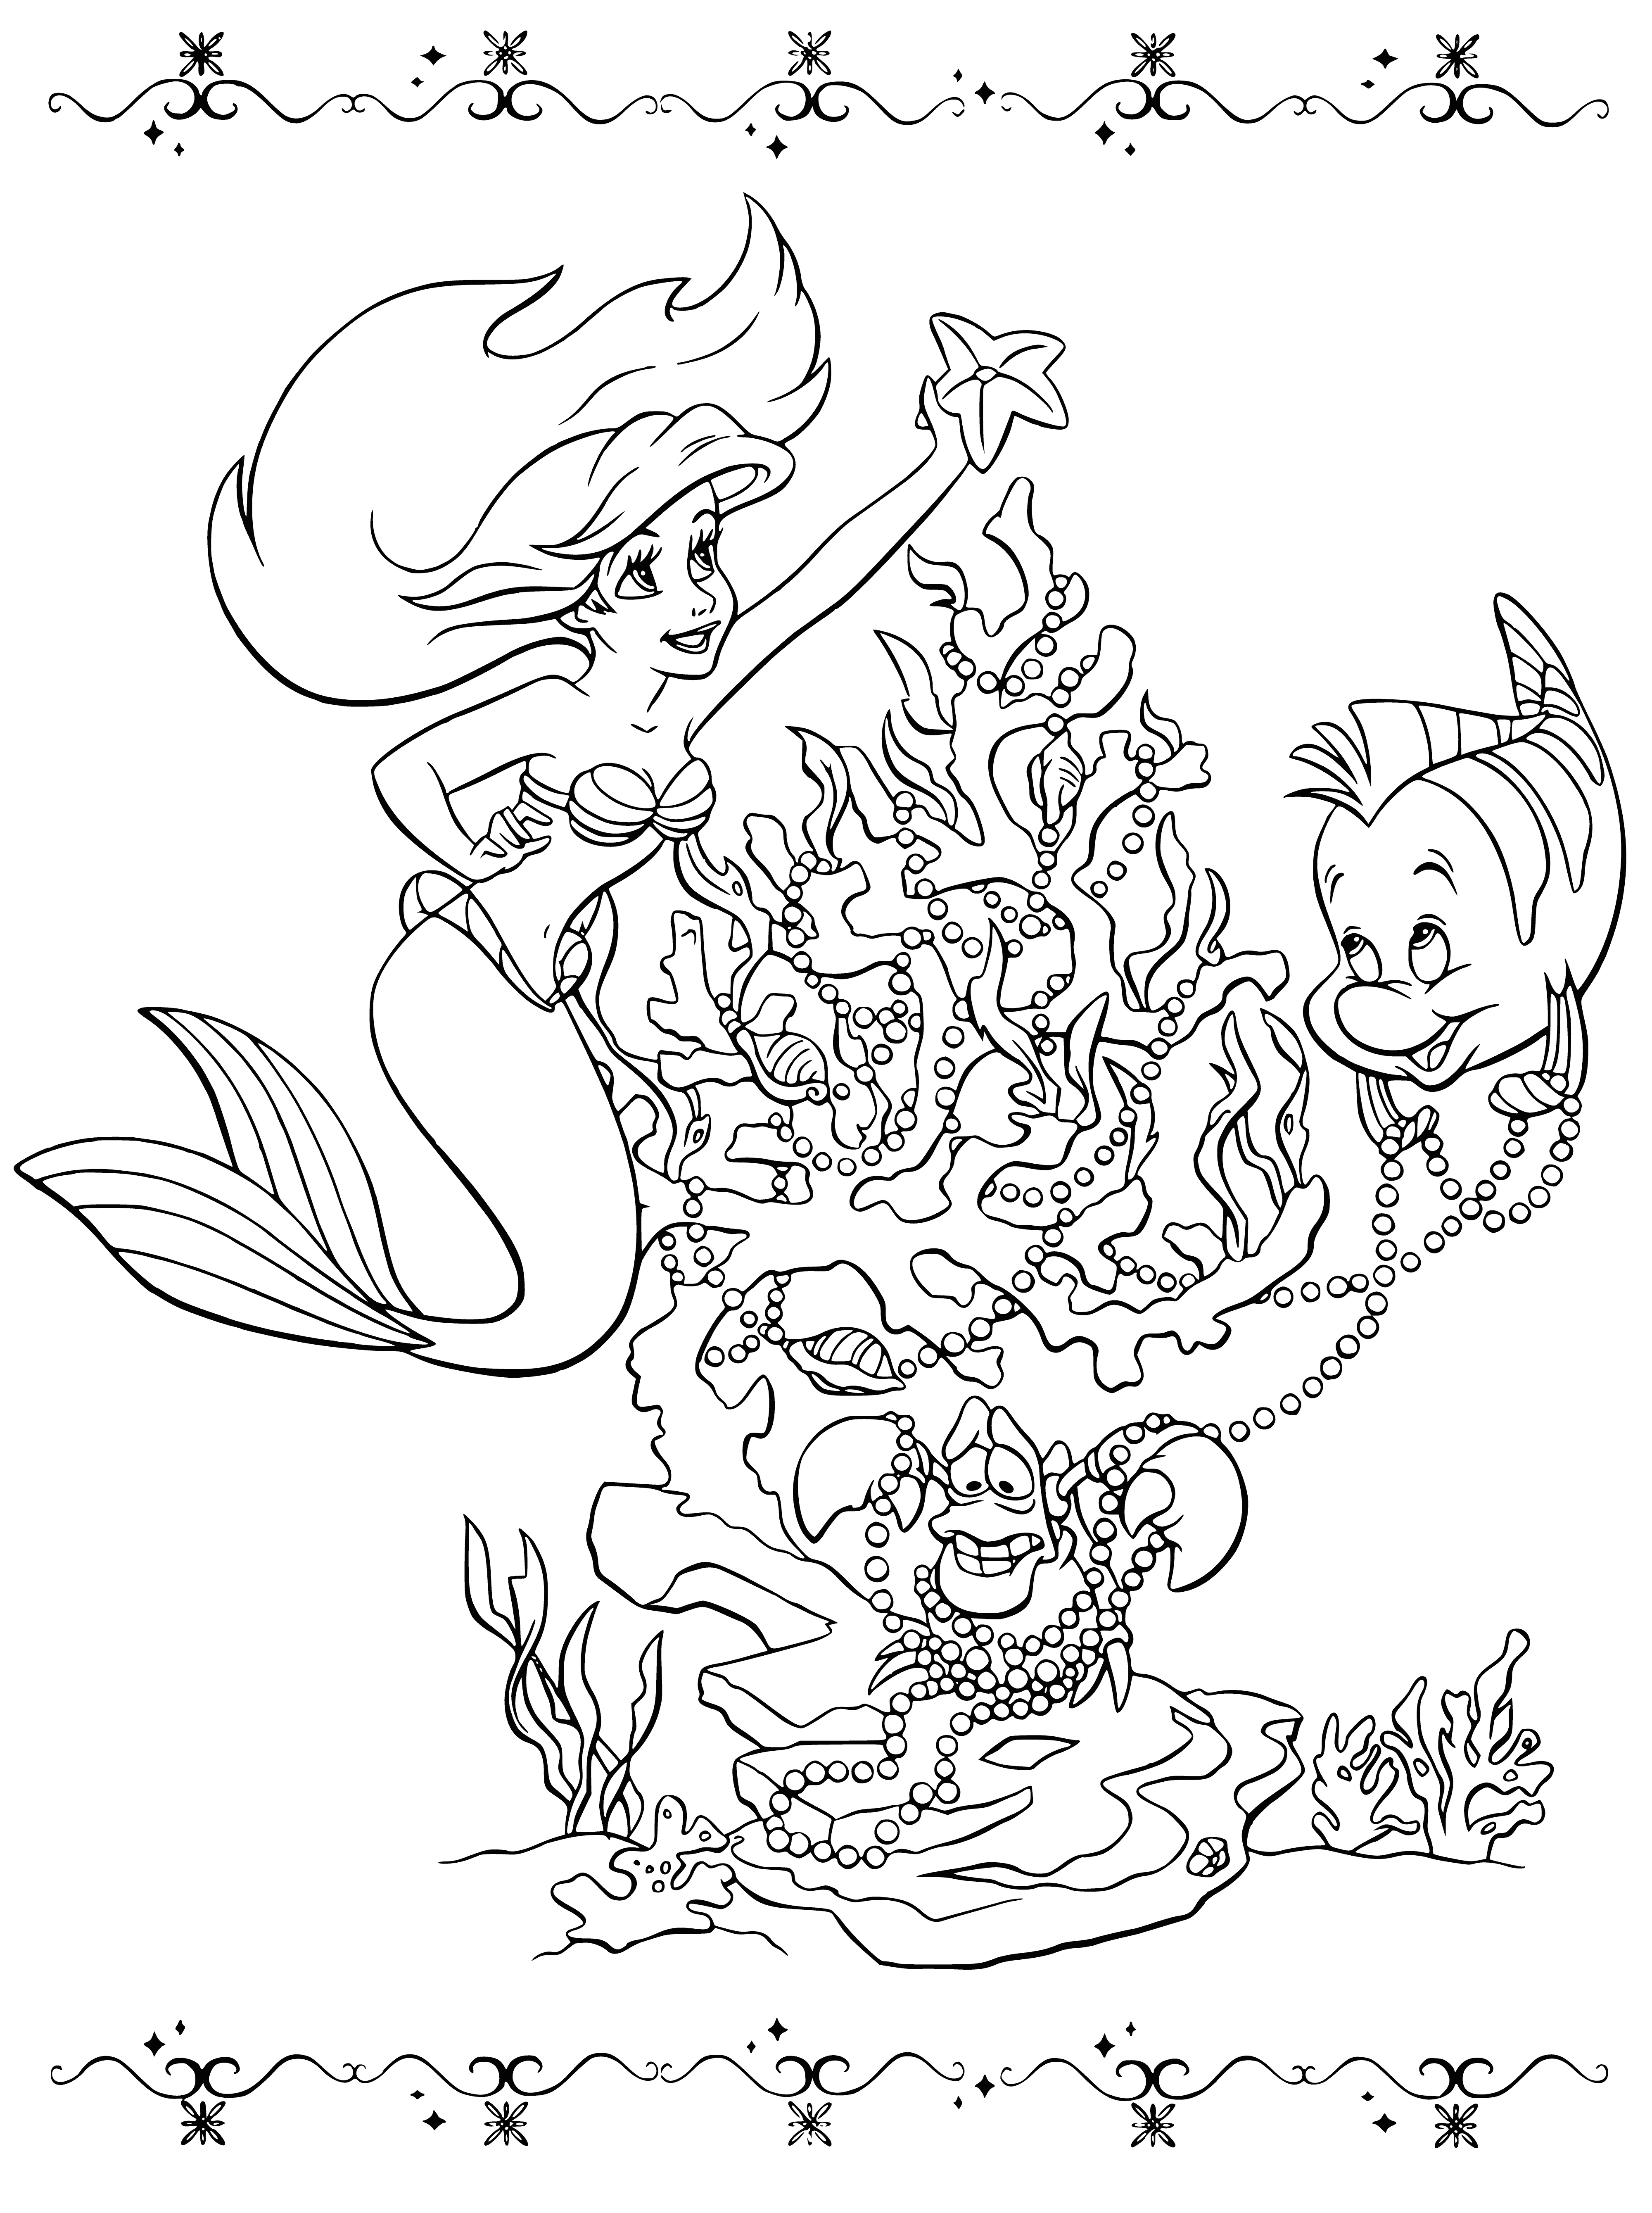 The little mermaid is preparing for the New Year coloring page